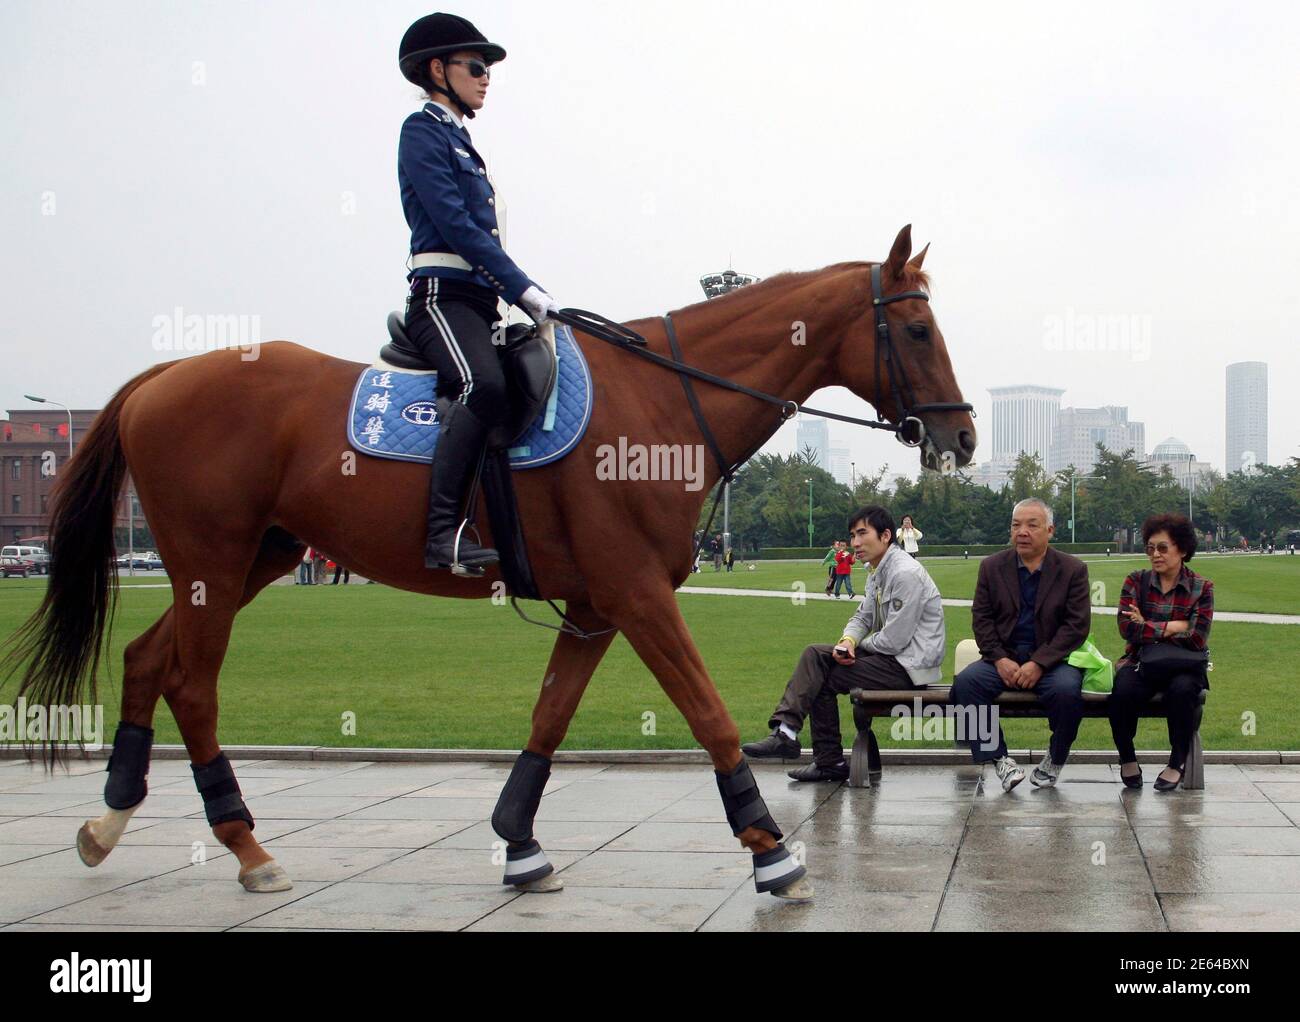 A policewoman on horseback patrols in a park in Dalian, Liaoning province October 2, 2010. The Dalian mounted policewoman unit was founded in December 1994. REUTERS/Jacky Chen (CHINA - Tags: ANIMALS) Stock Photo